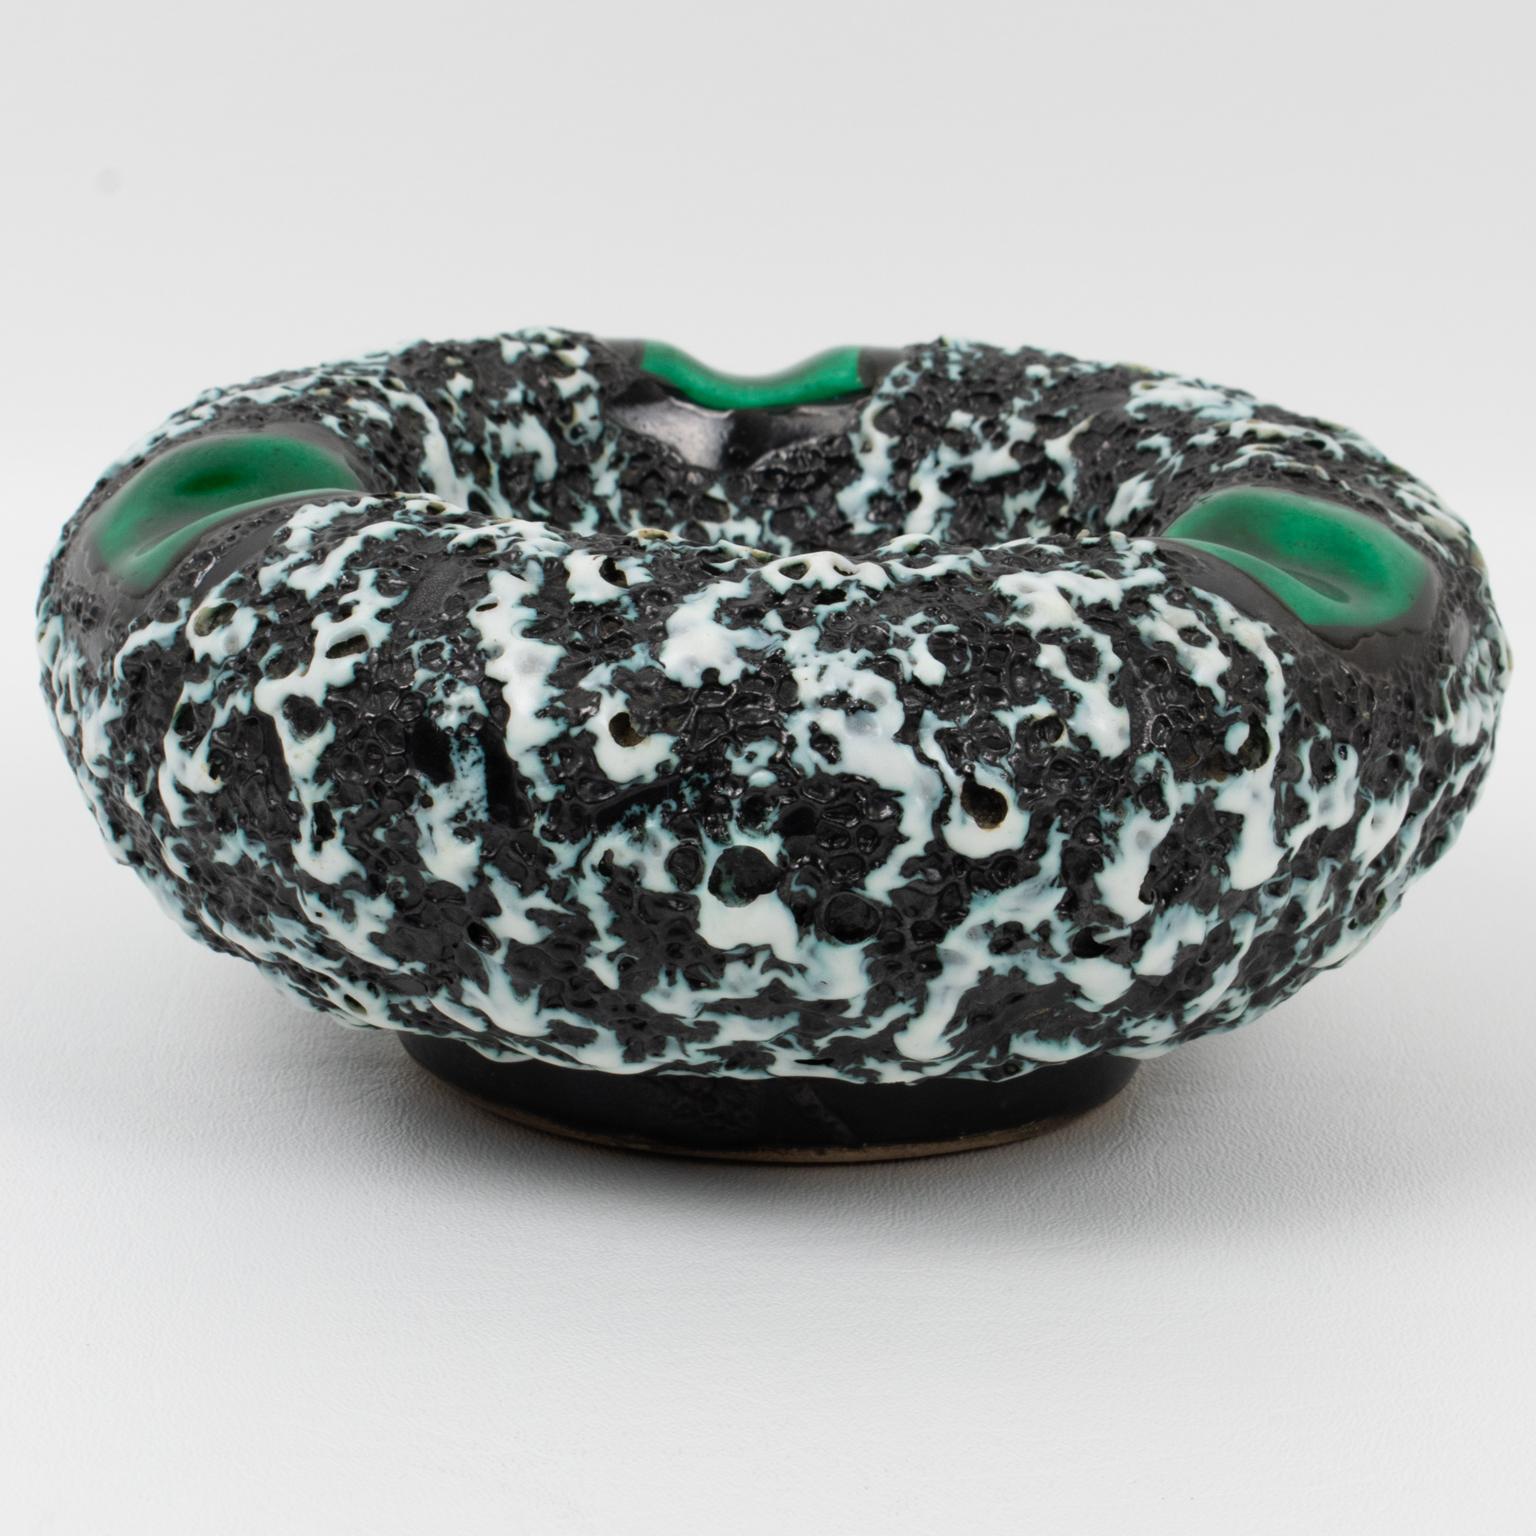 This lovely Mid-Century ceramic cigar ashtray, desk tidy, vide poche, or catchall, was crafted by Marius Giuge Atelier in Vallauris, France, in the 1960s. The puffy donut-shaped design has a lava-textured pattern in black and white colors with green